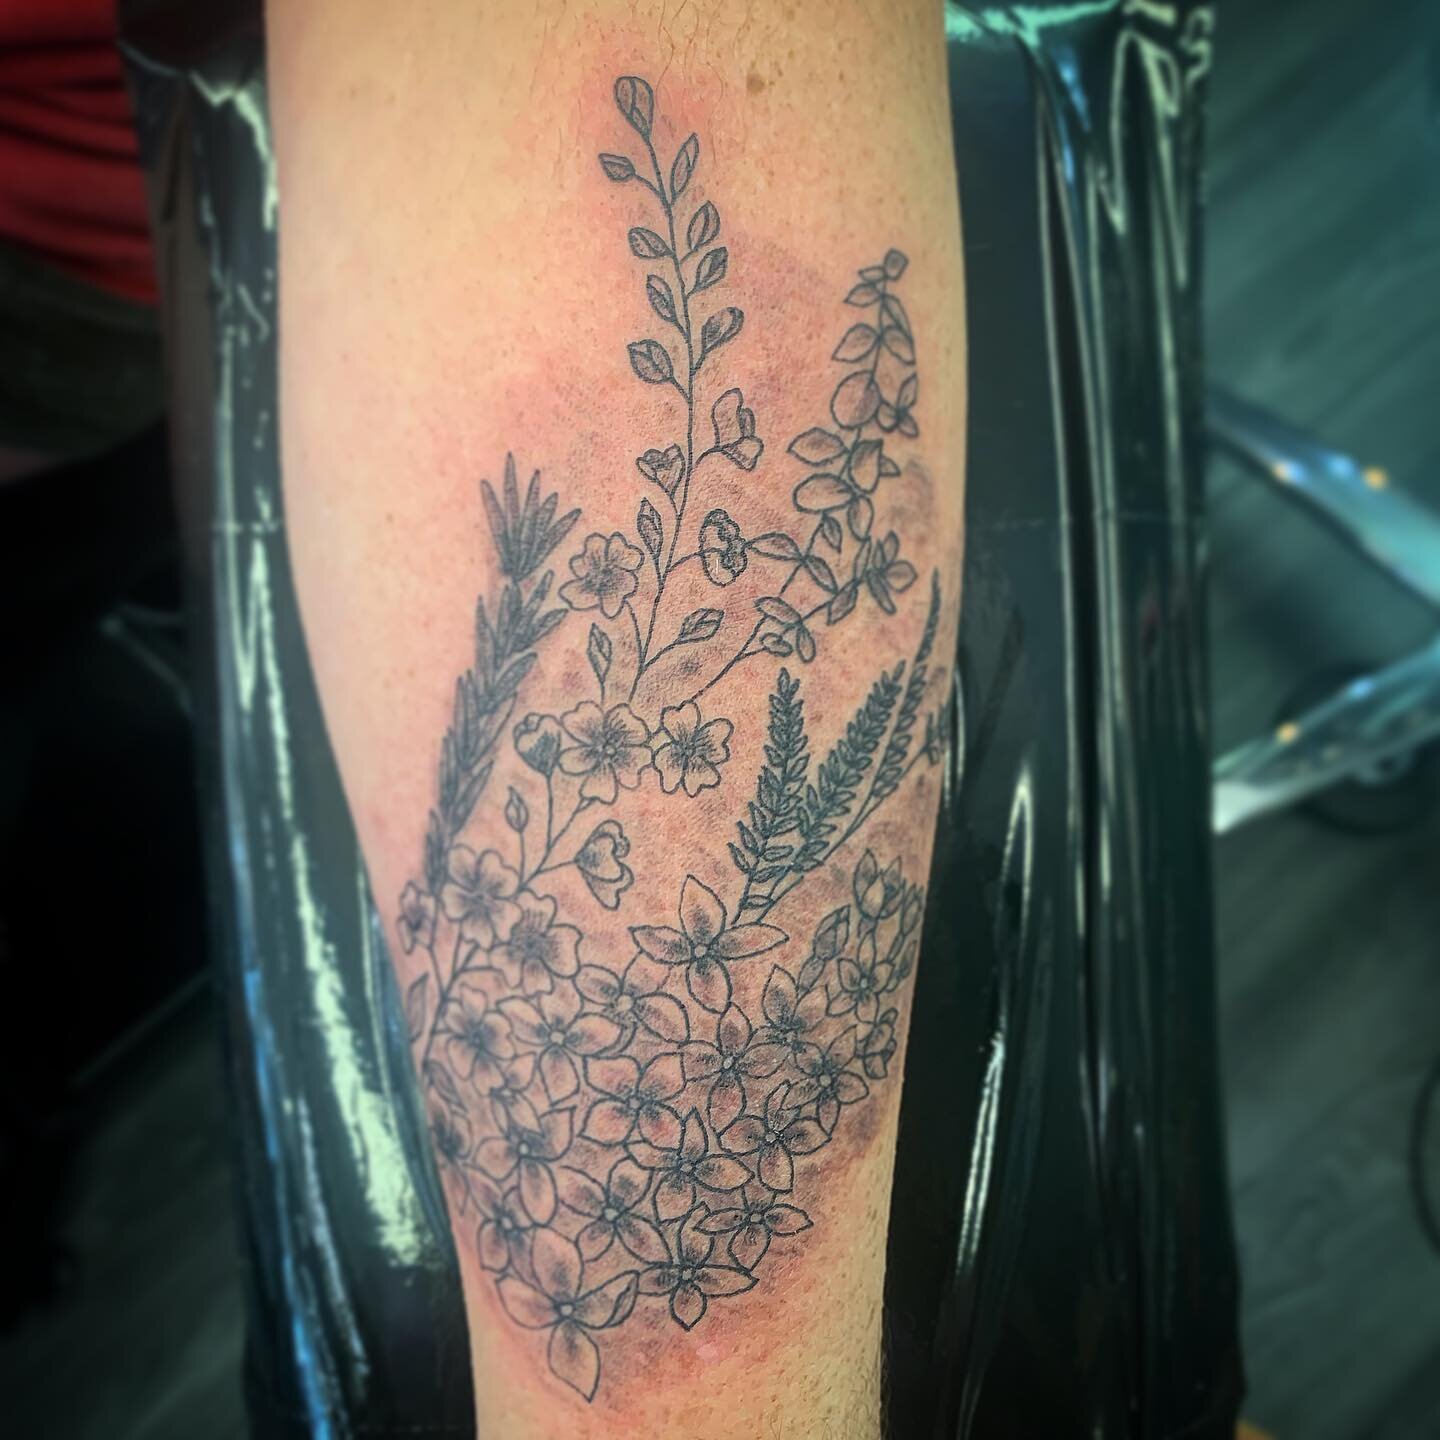 Sarah came back for this collection of flowers on her forearm. I had a blast- thanks lady!! 😍 #mayamodification #flowertattoo #blackandgreytattoo #flowerbouquet